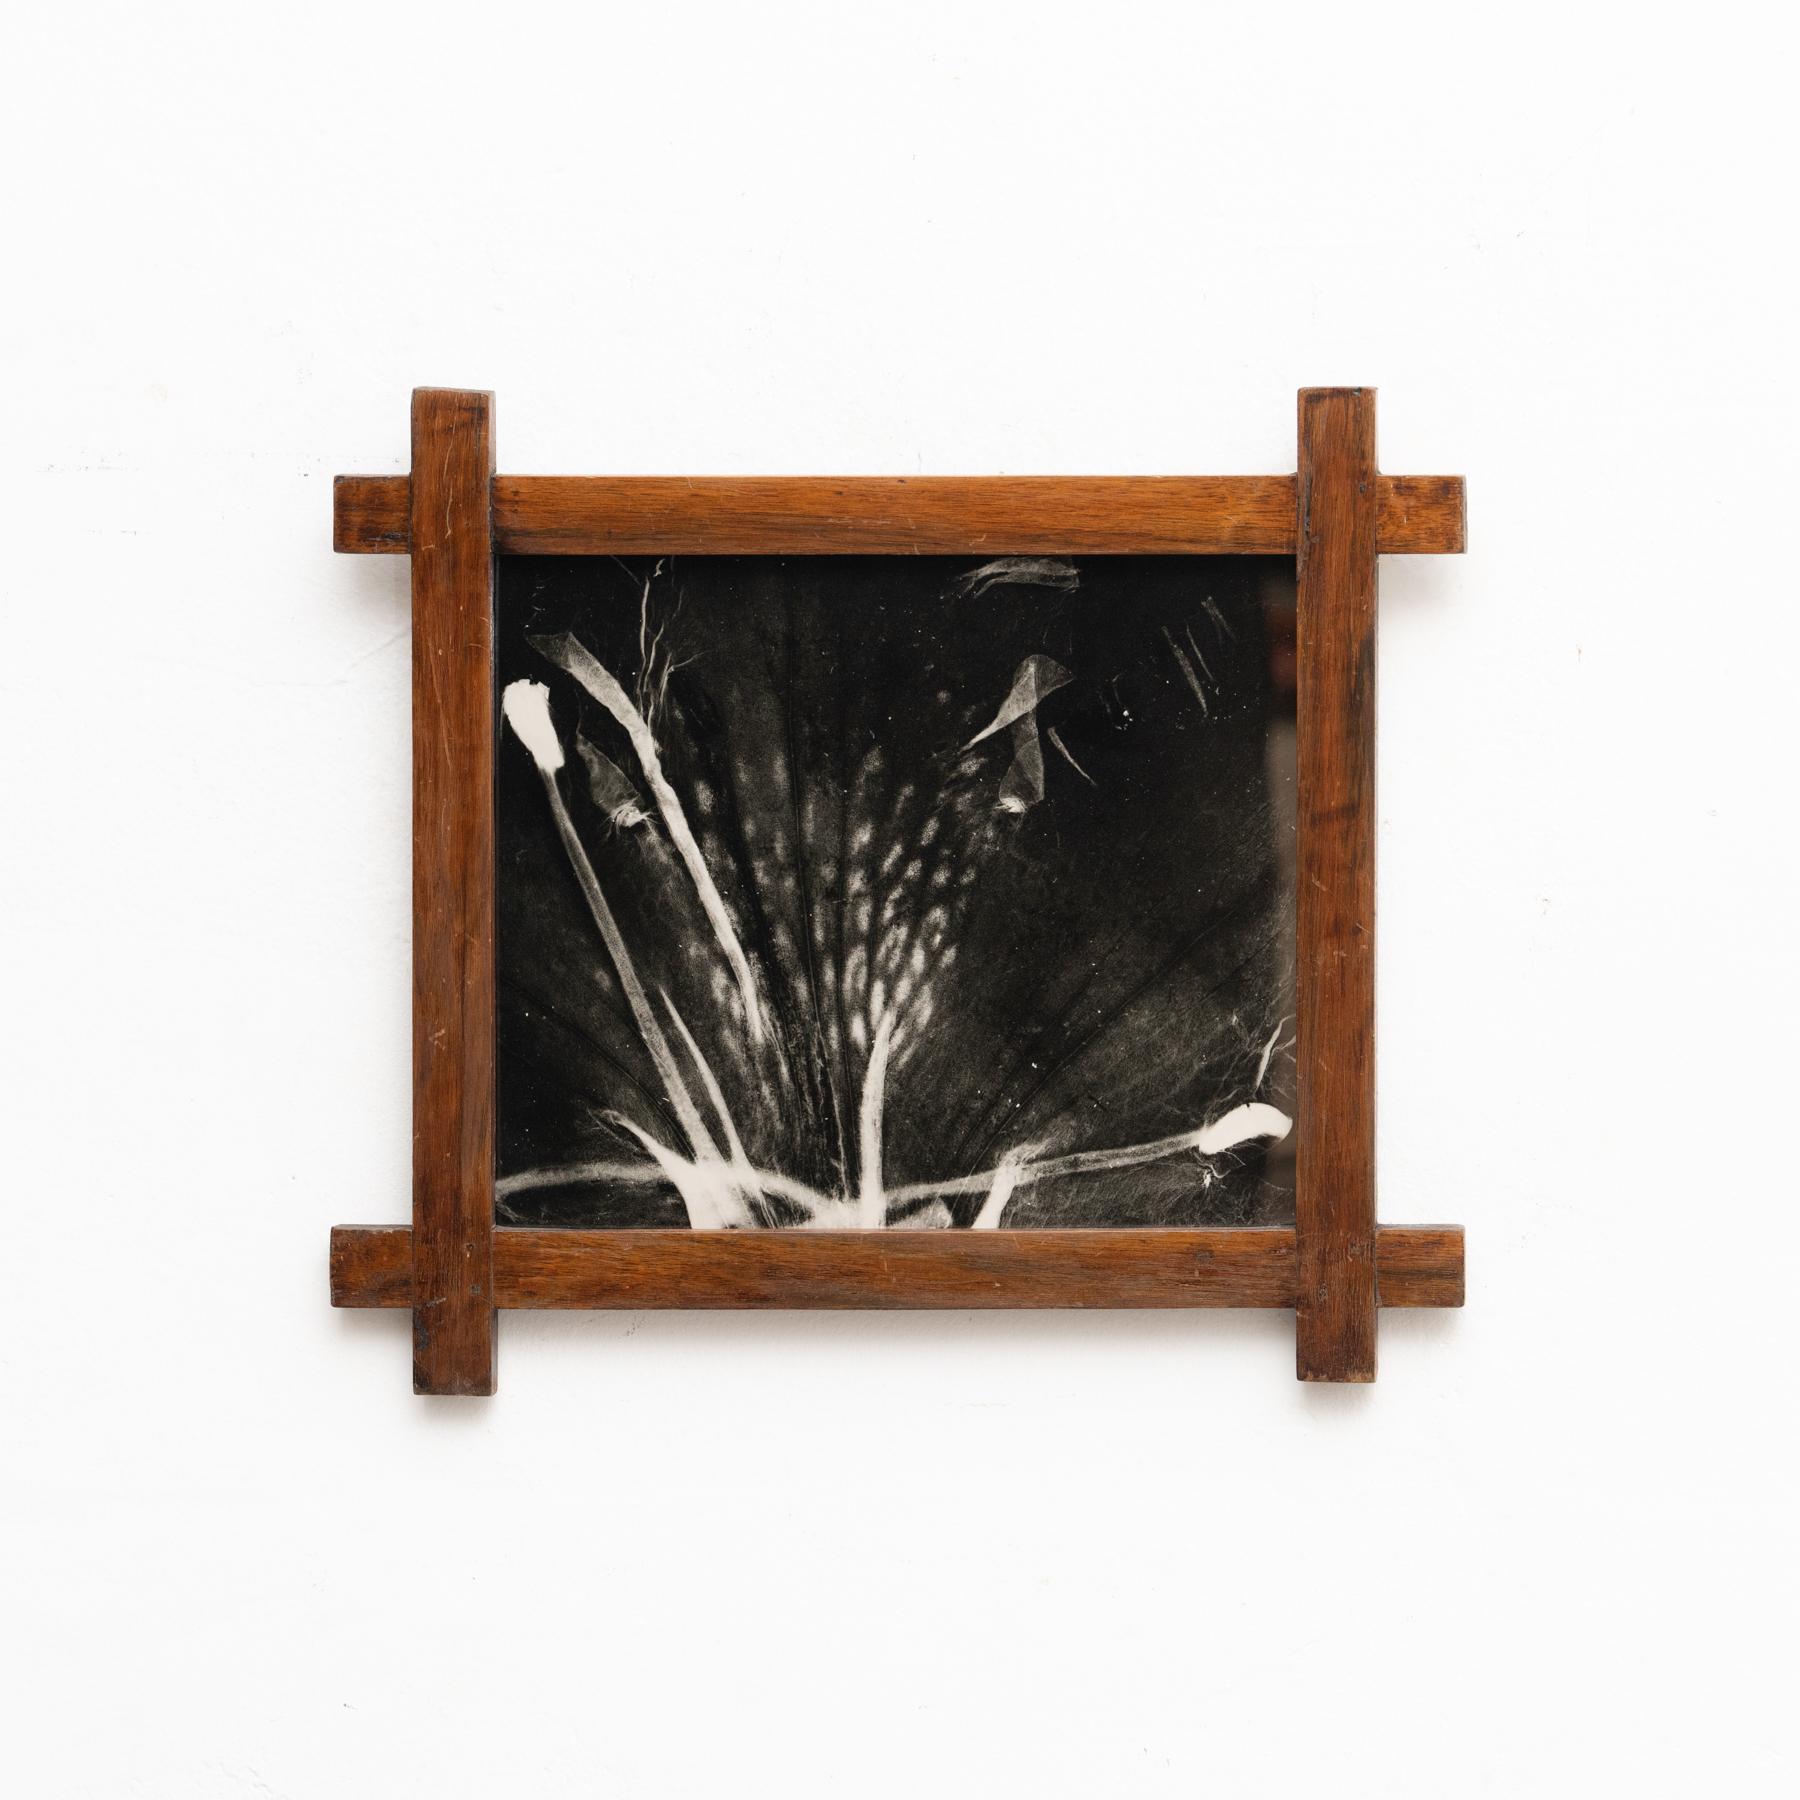 Photogram by artist Enrico Garzaro from the Flora series, 2015.

Gelatin silver paper.

Framed.

In good original condition, with minor wear consistent with age and use, preserving a beautiful patina.